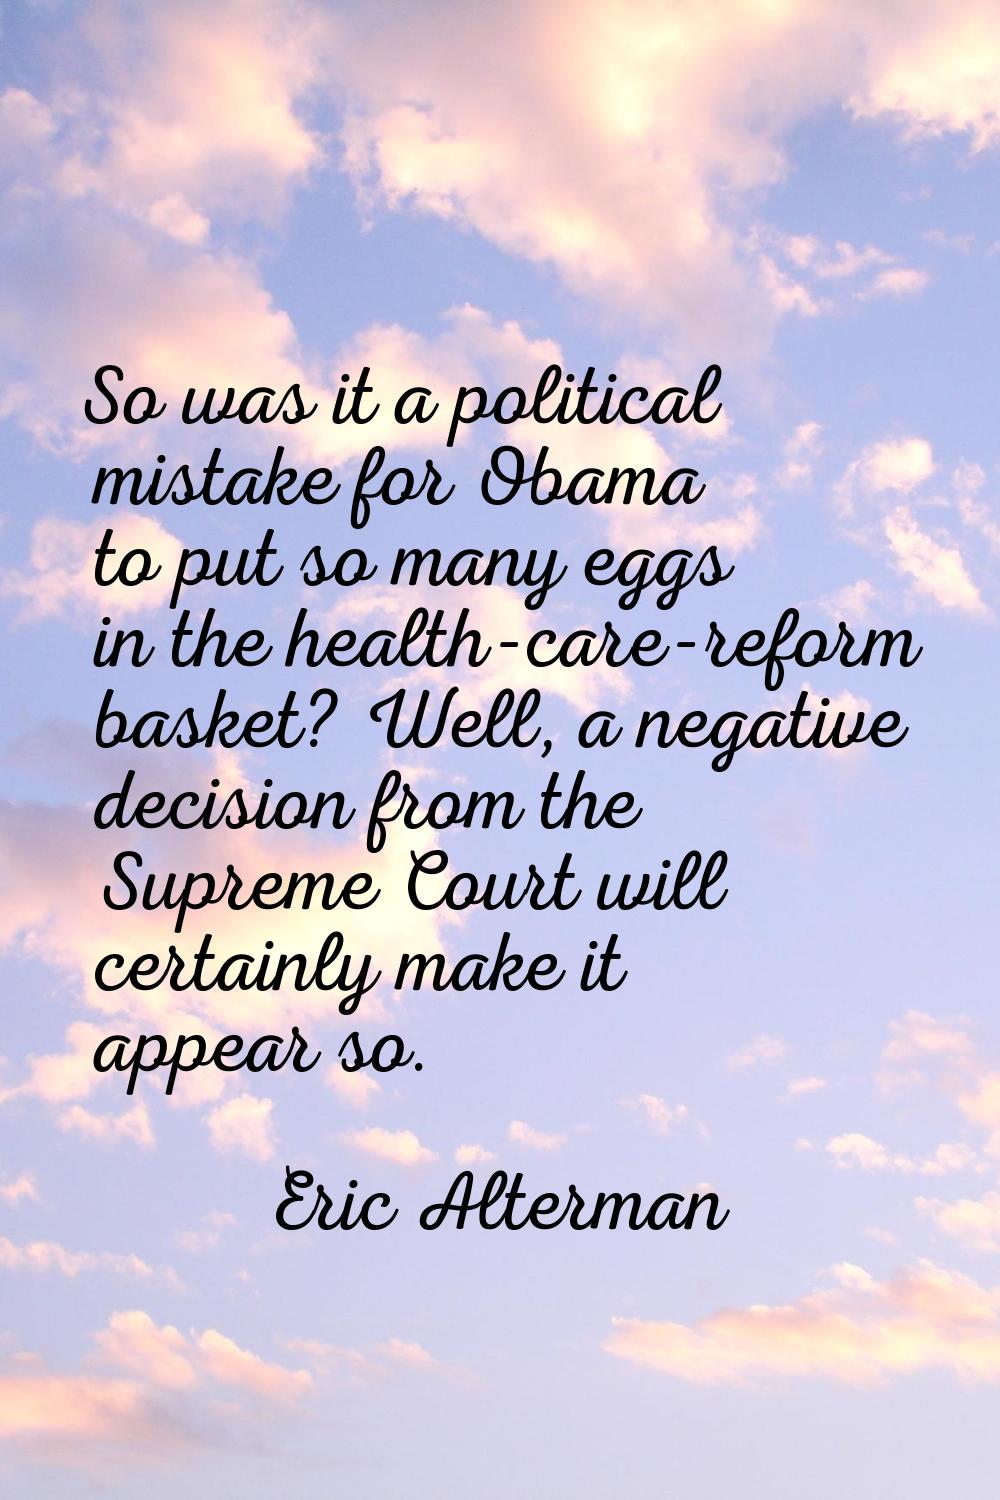 So was it a political mistake for Obama to put so many eggs in the health-care-reform basket? Well,